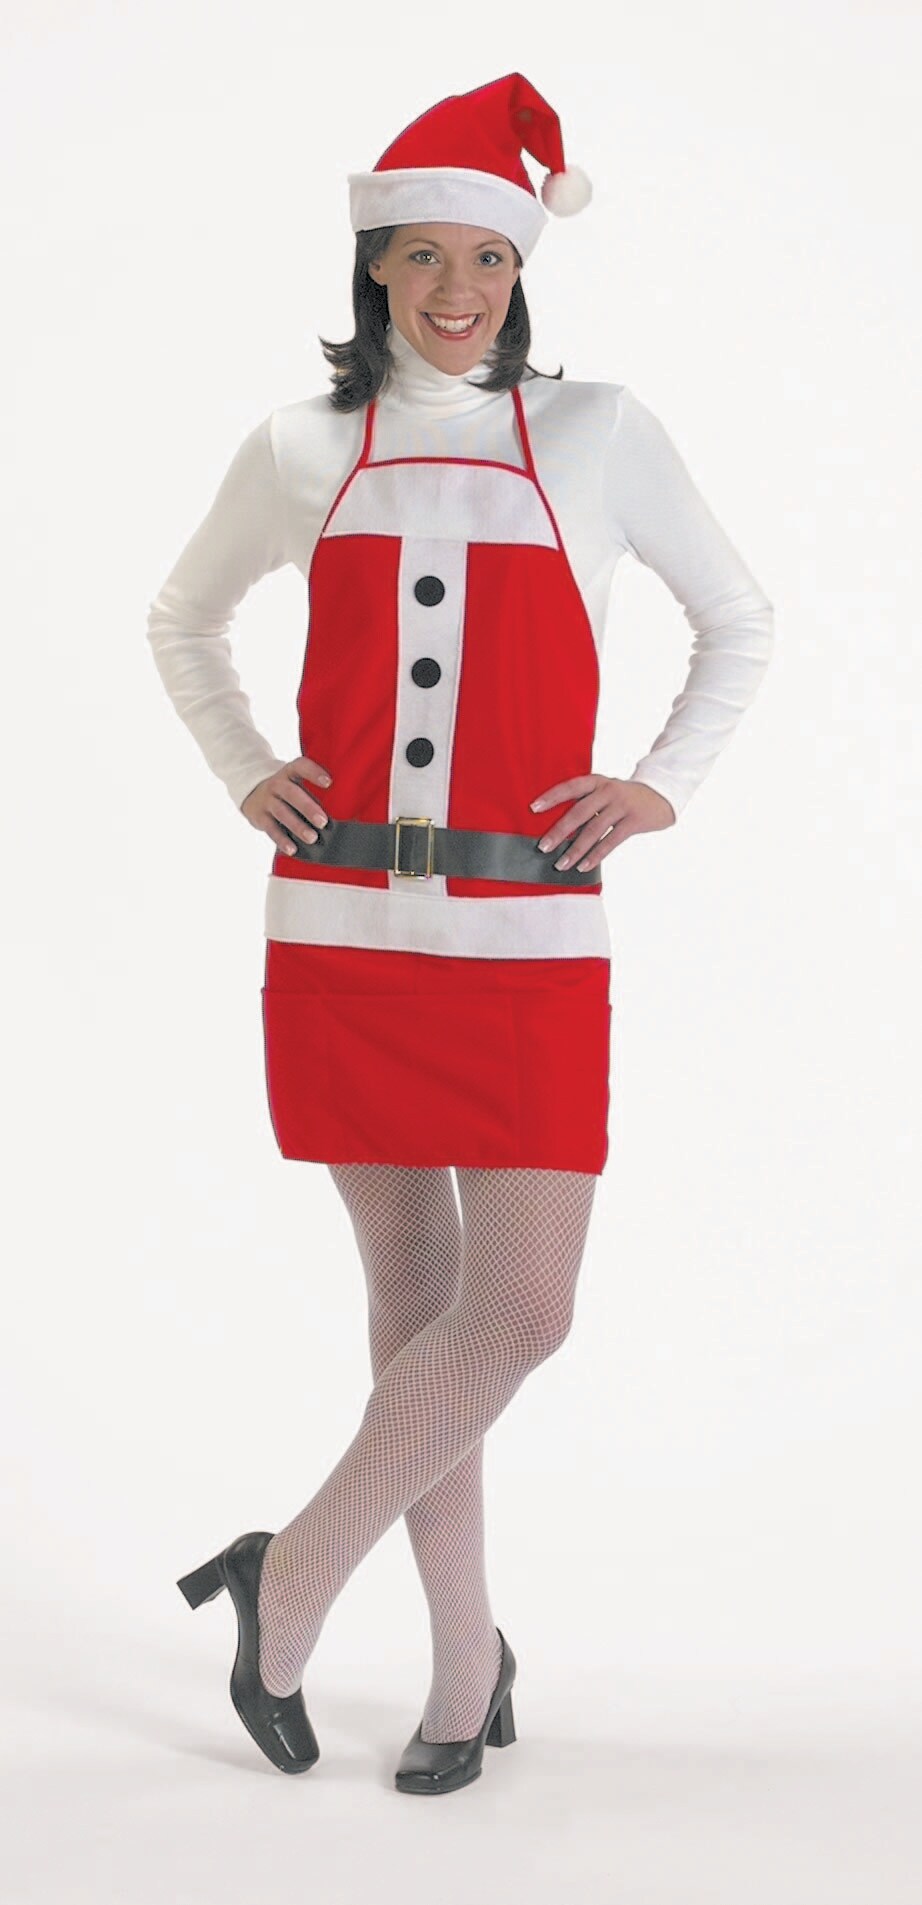 The Costume Center Red and White Christmas Apron with Matching Hat - Adult One Size Fits Most